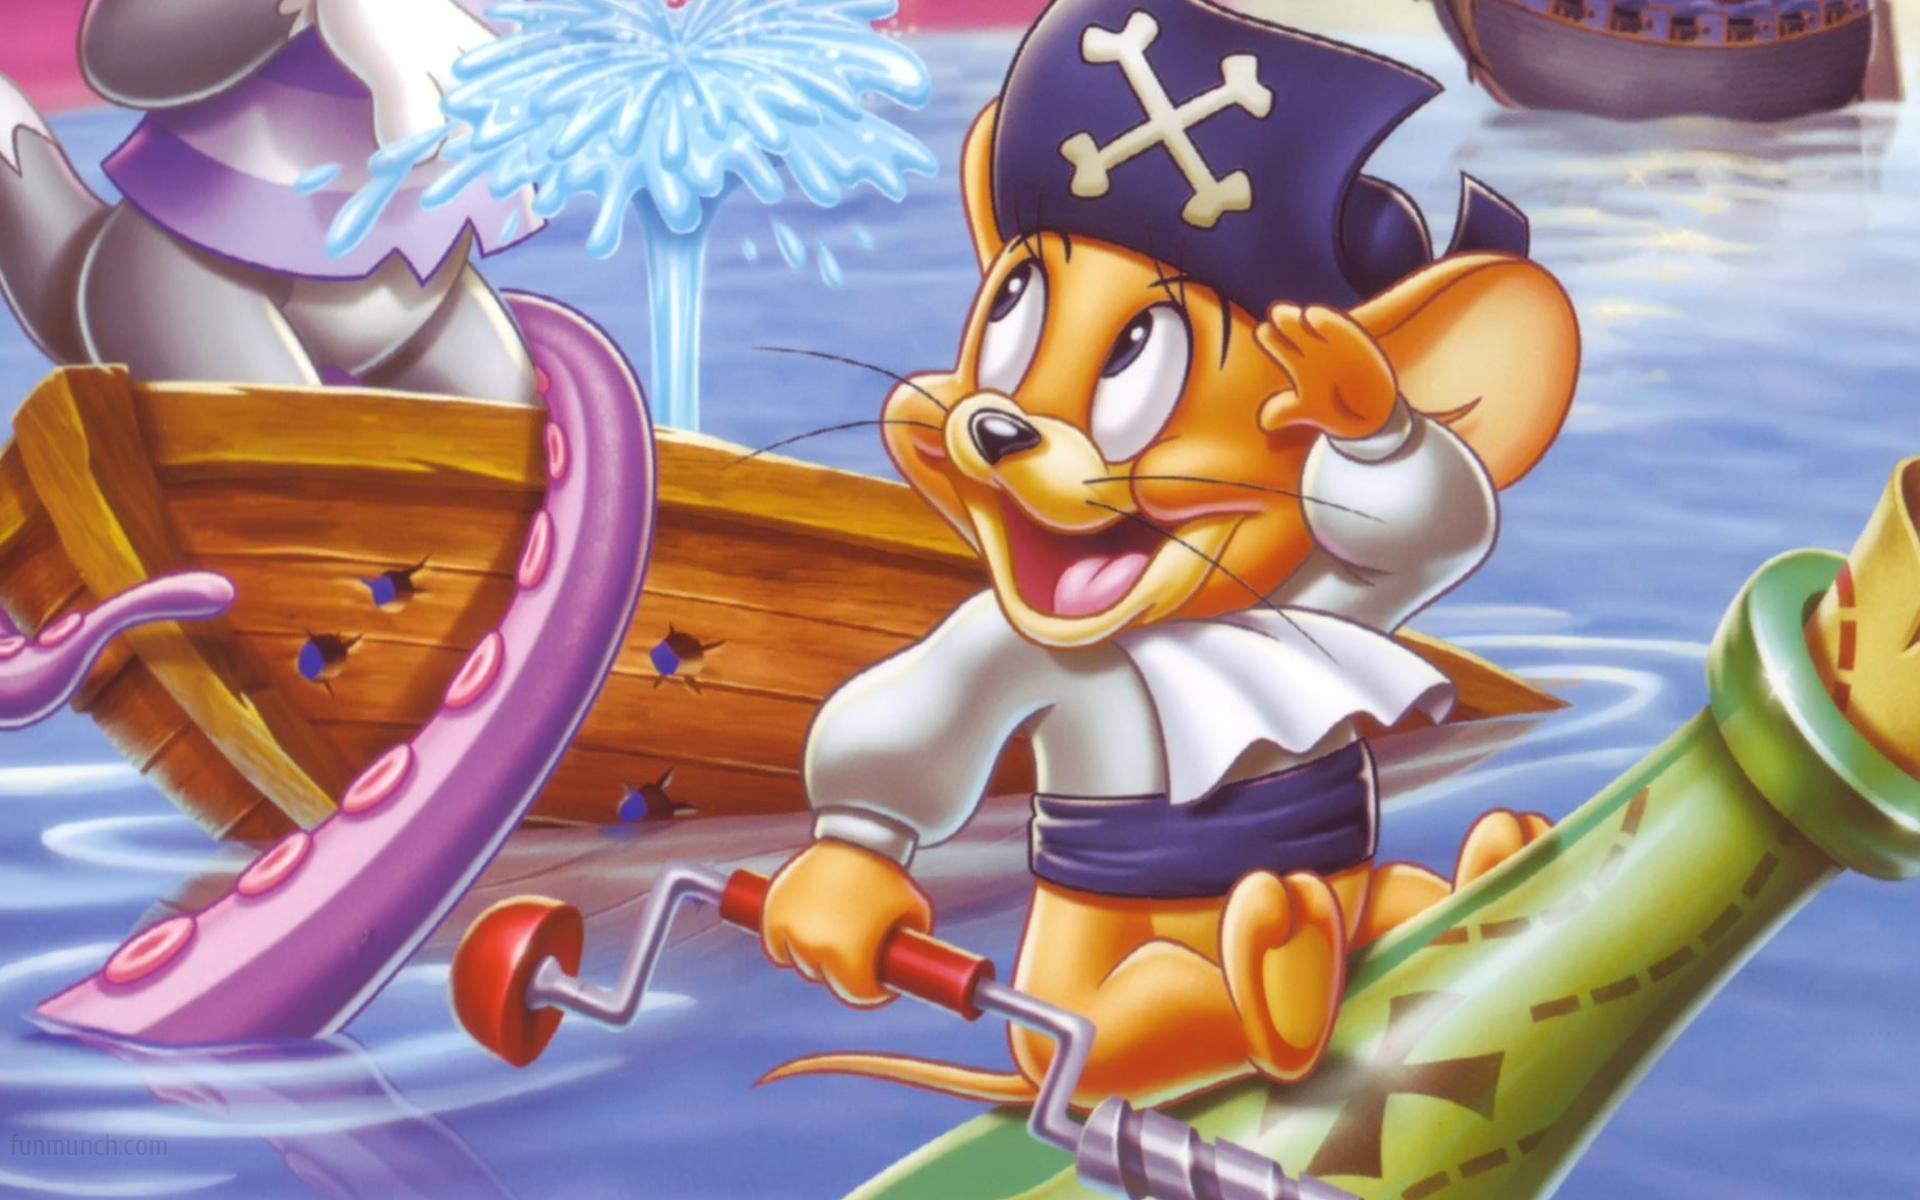 Tom And Jerry Wallpapers Free Download HD Wallpapers Download Free Images Wallpaper [wallpaper981.blogspot.com]